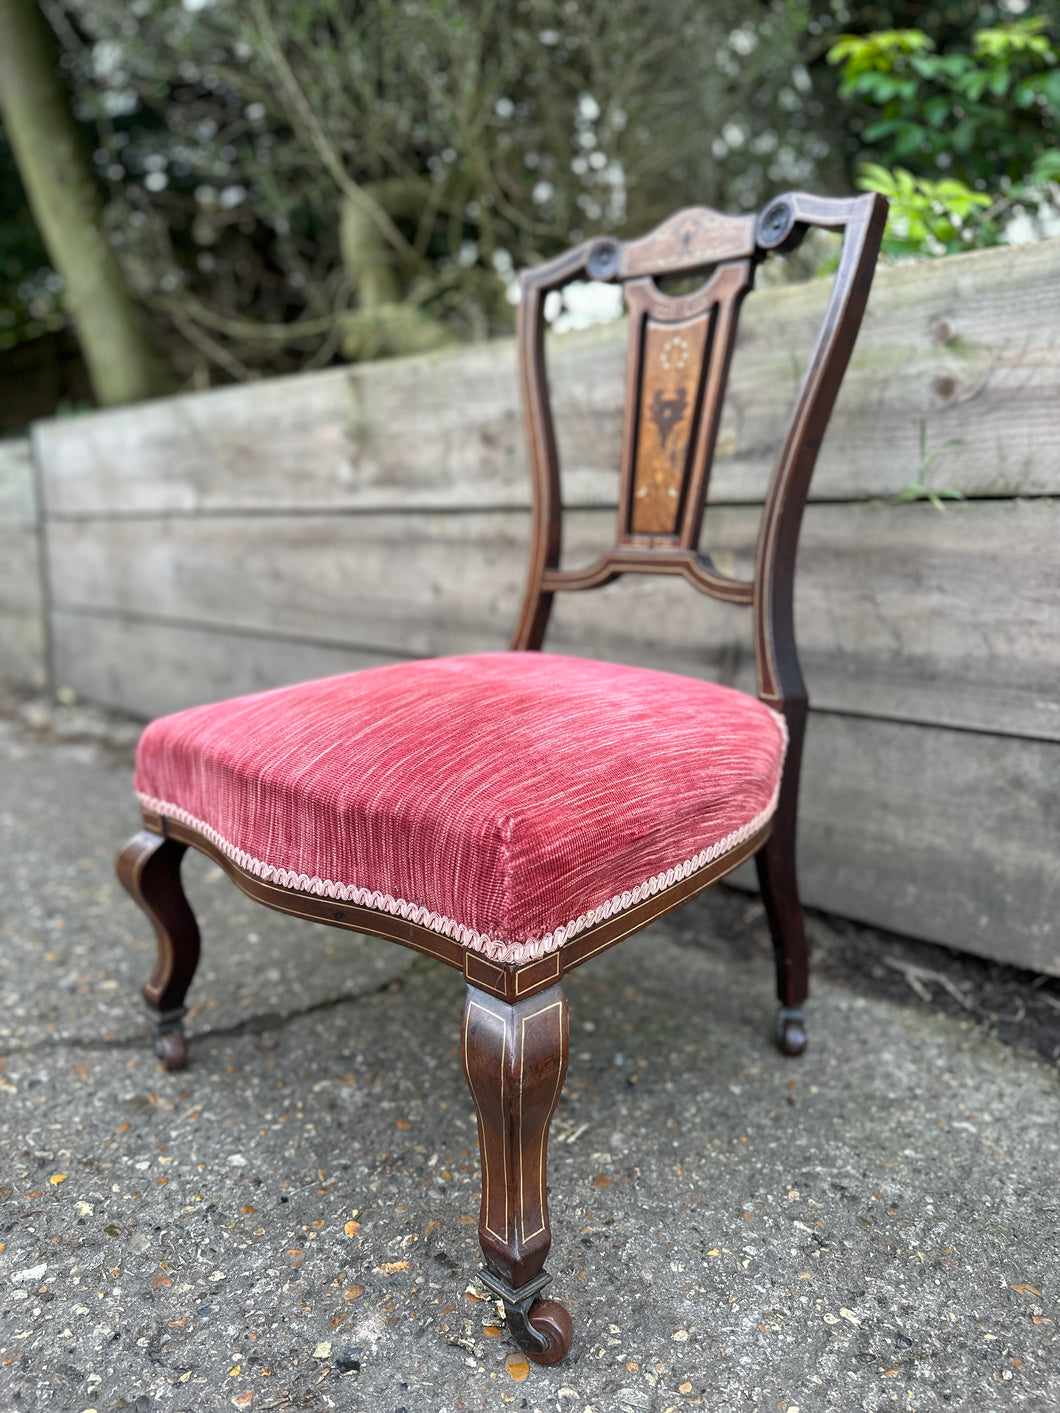 Low Edwardian Occasional Bedroom Chair With Intricate Inlay Detail And Red Upholstered Seat